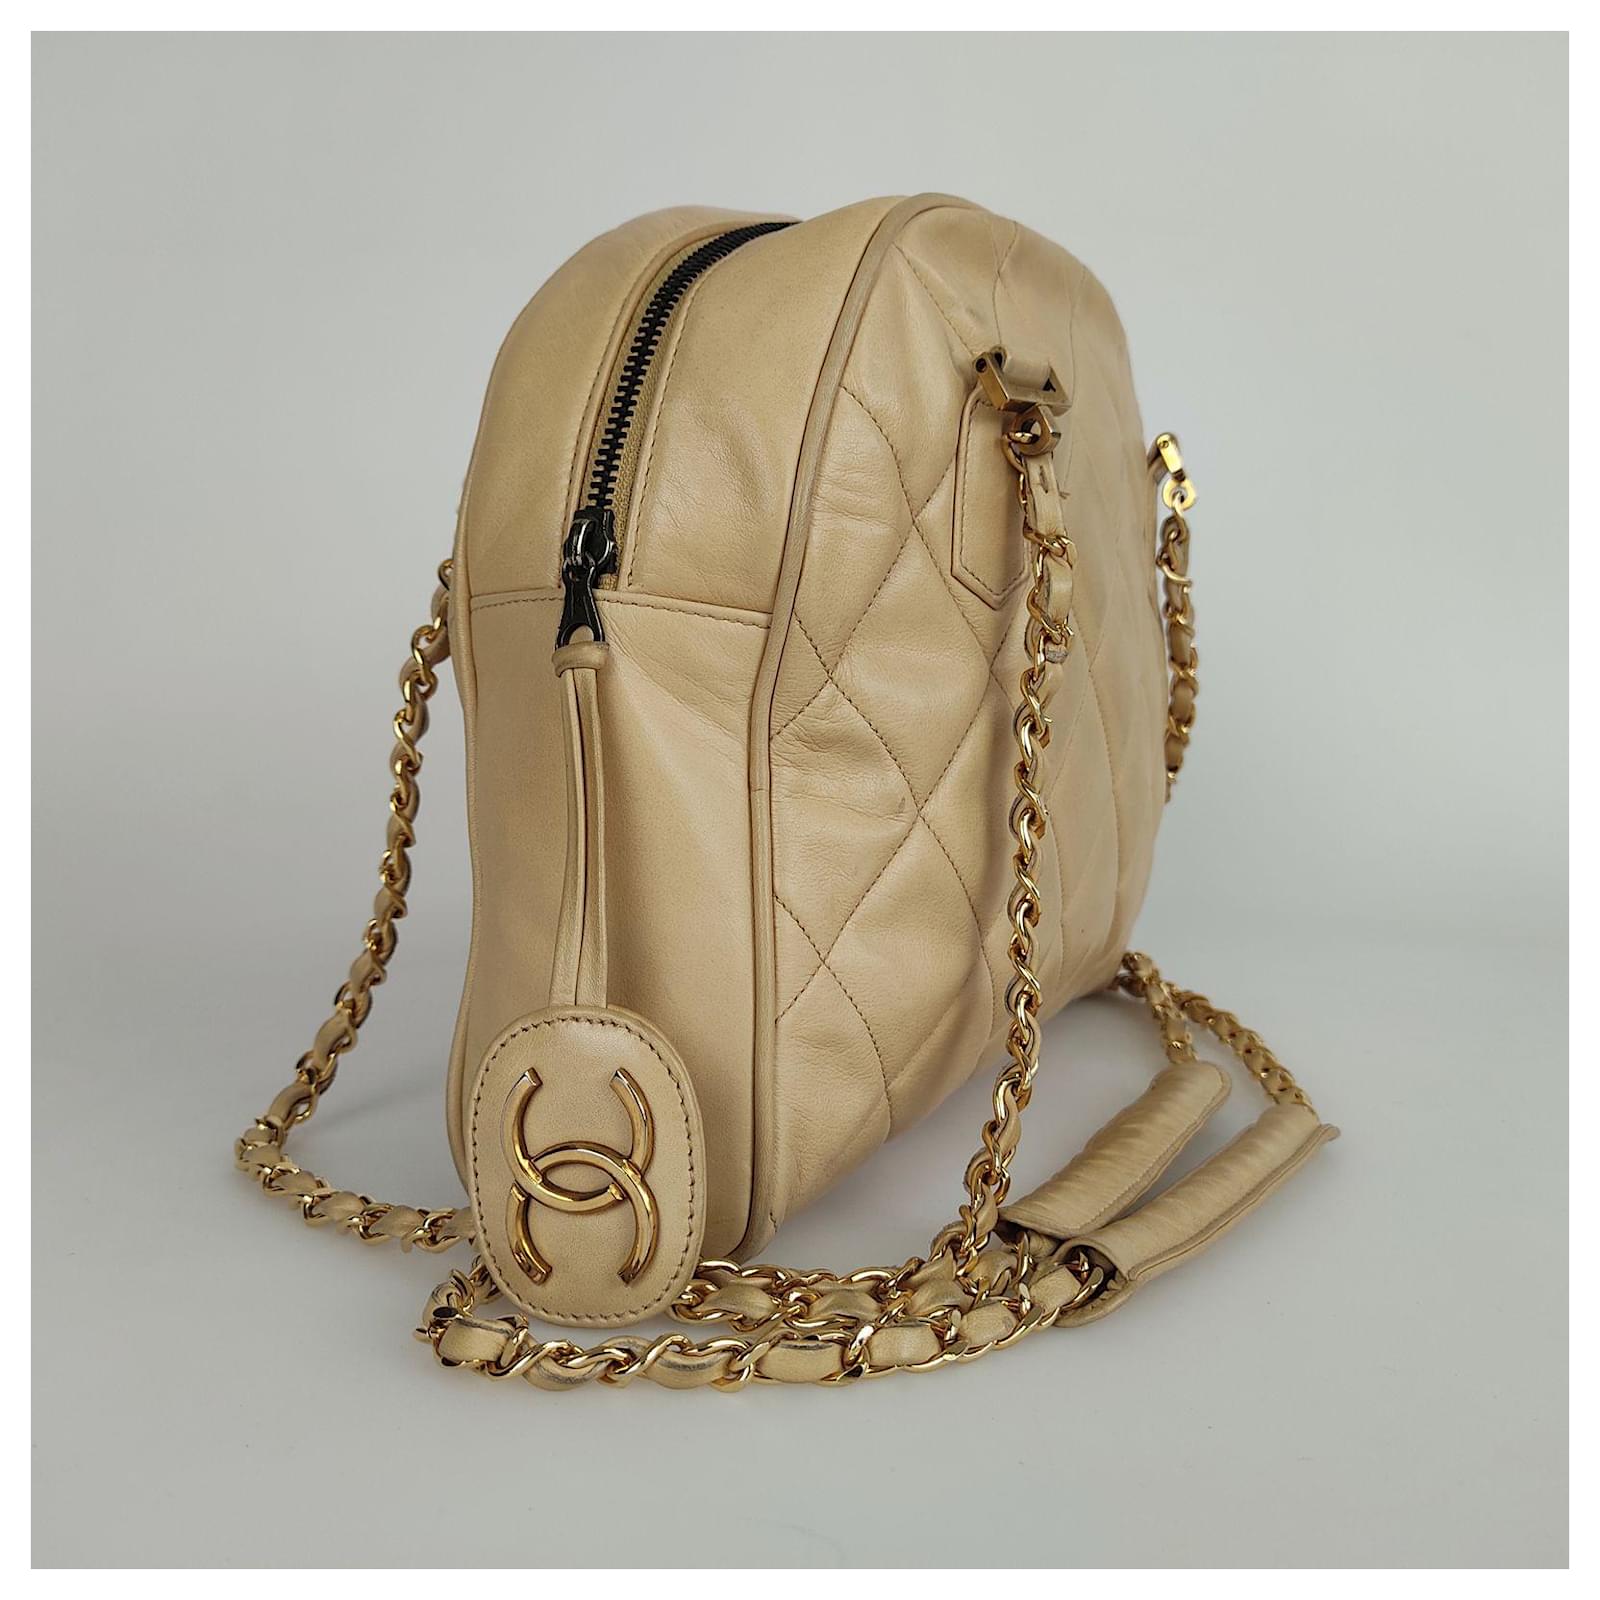 Chanel shoulder bag in beige matelassé leather from the 80s ref